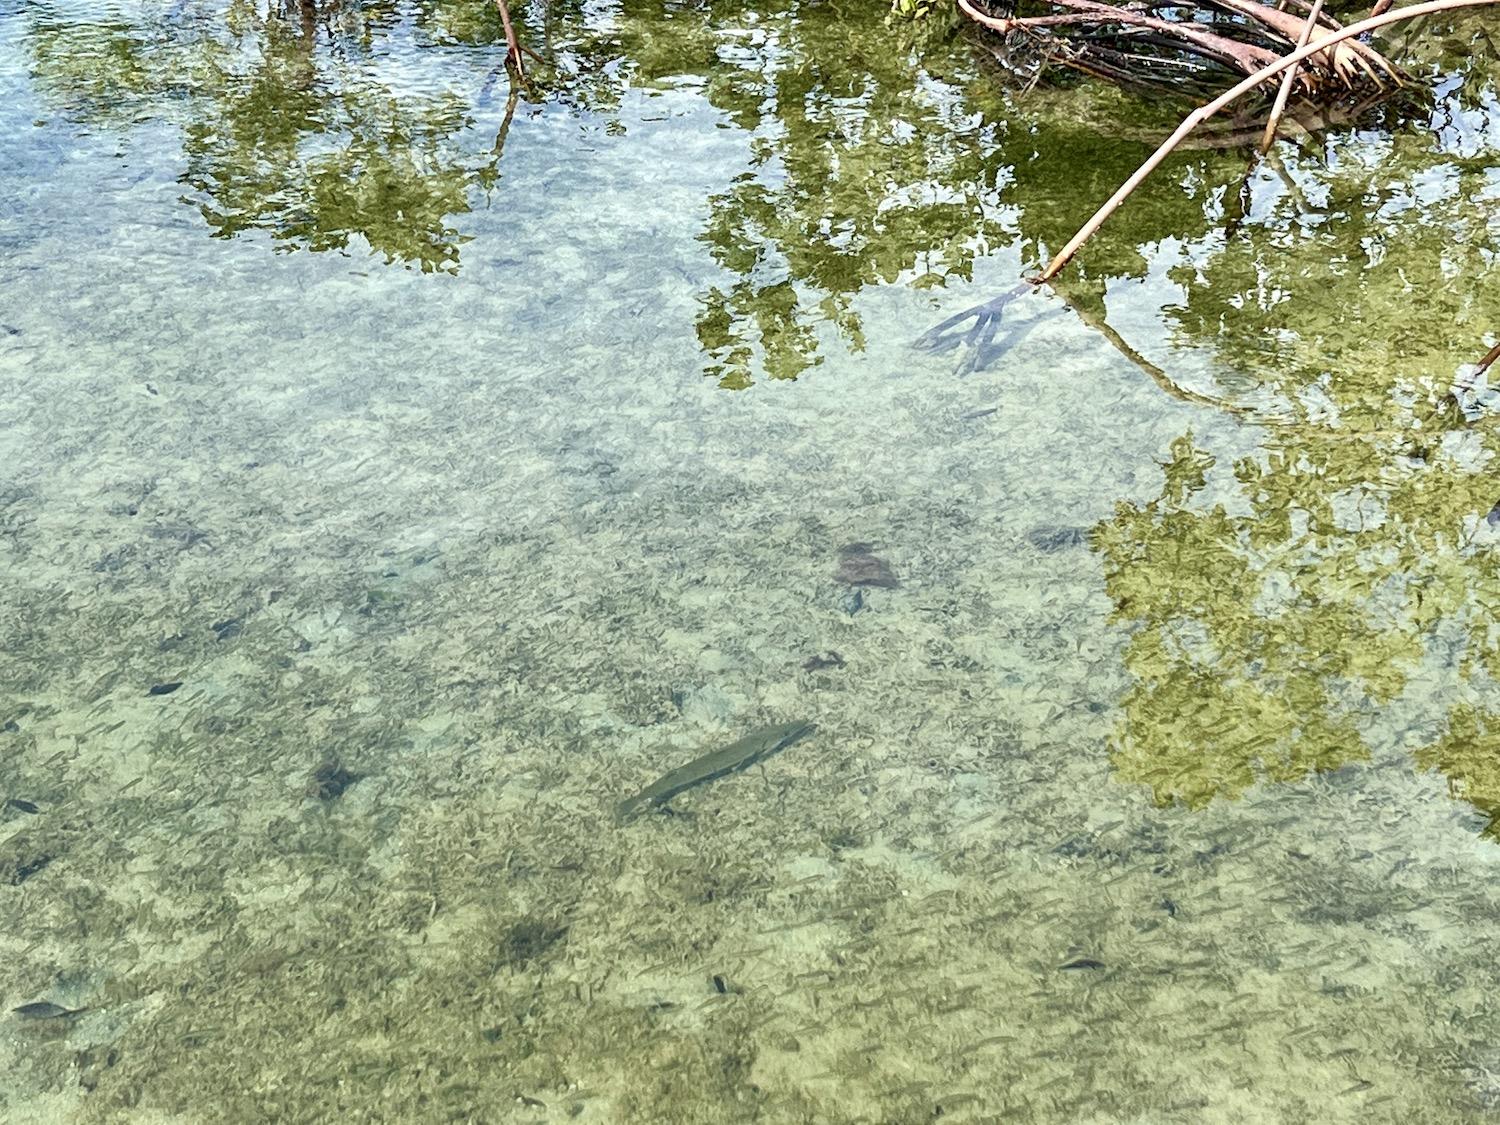 A young barracuda waits for prey in Bonefish Pond National Park.